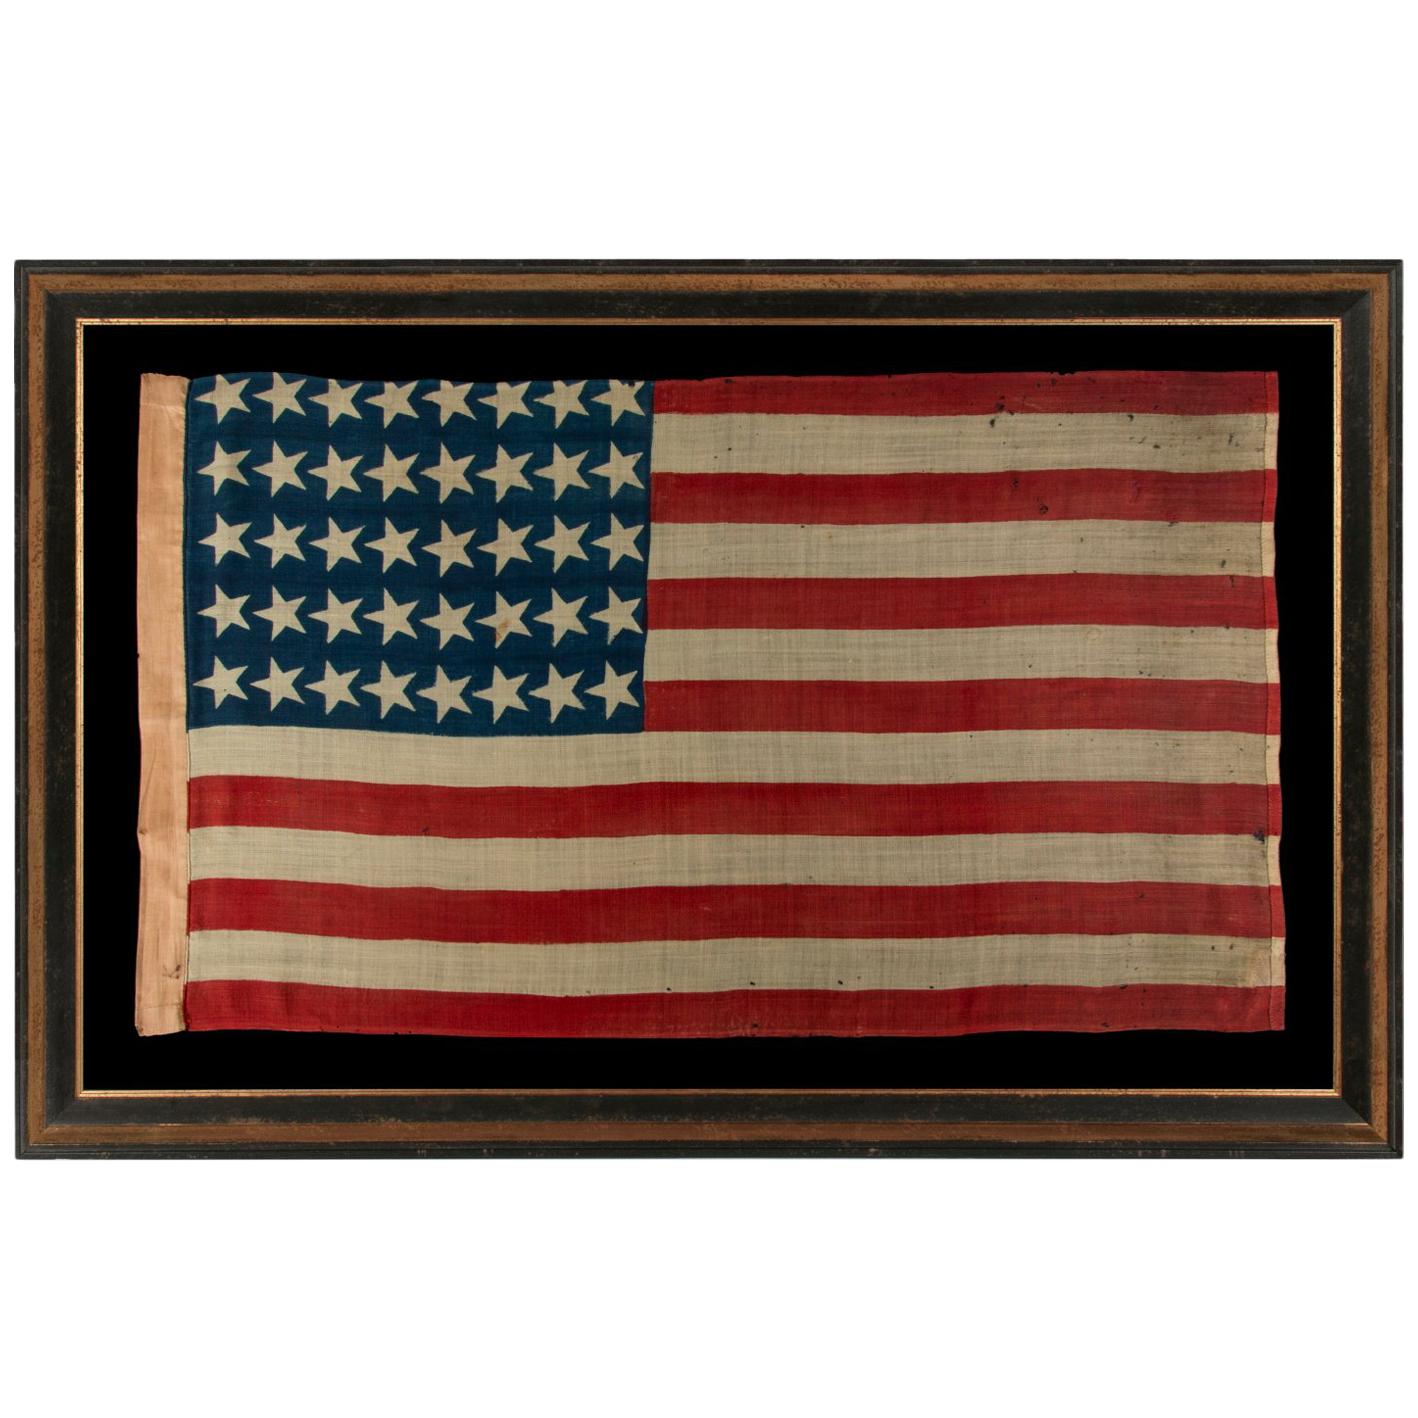 40 Canted Stars on an Antique American Flag, South Dakota Statehood, 1889